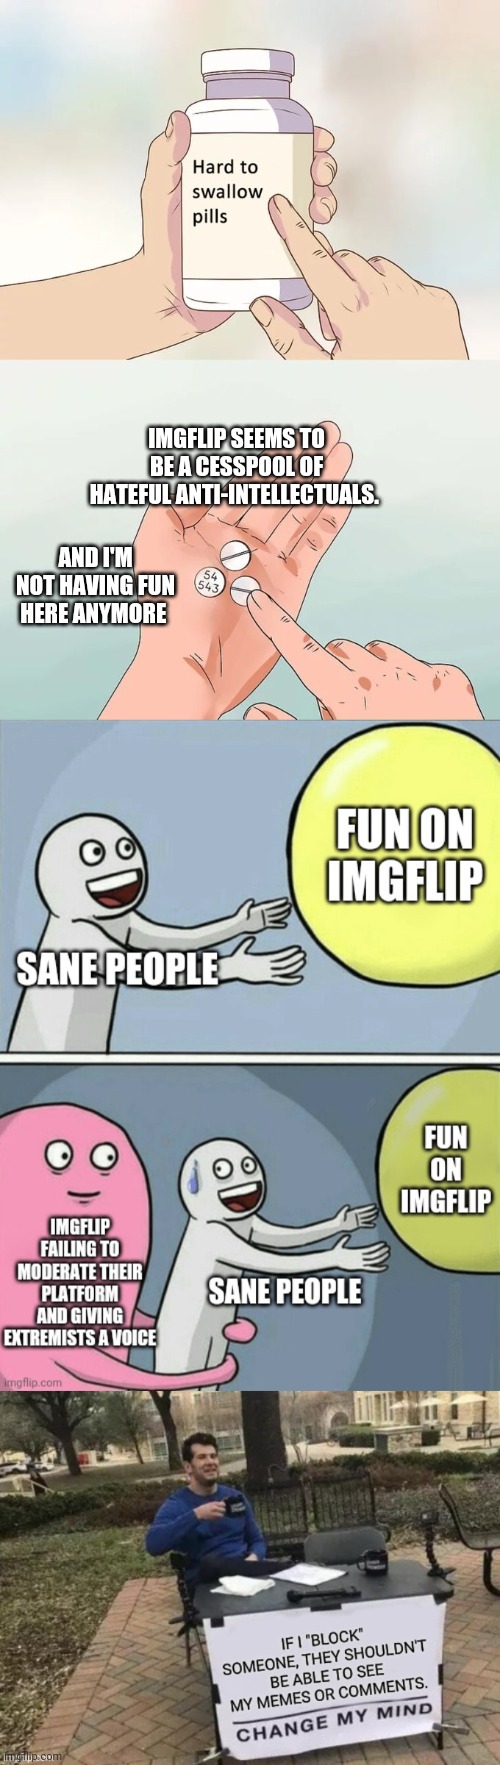 IMGflip could be better, my new series in fun | IMGFLIP SEEMS TO BE A CESSPOOL OF HATEFUL ANTI-INTELLECTUALS. AND I'M NOT HAVING FUN HERE ANYMORE | image tagged in memes,hard to swallow pills | made w/ Imgflip meme maker